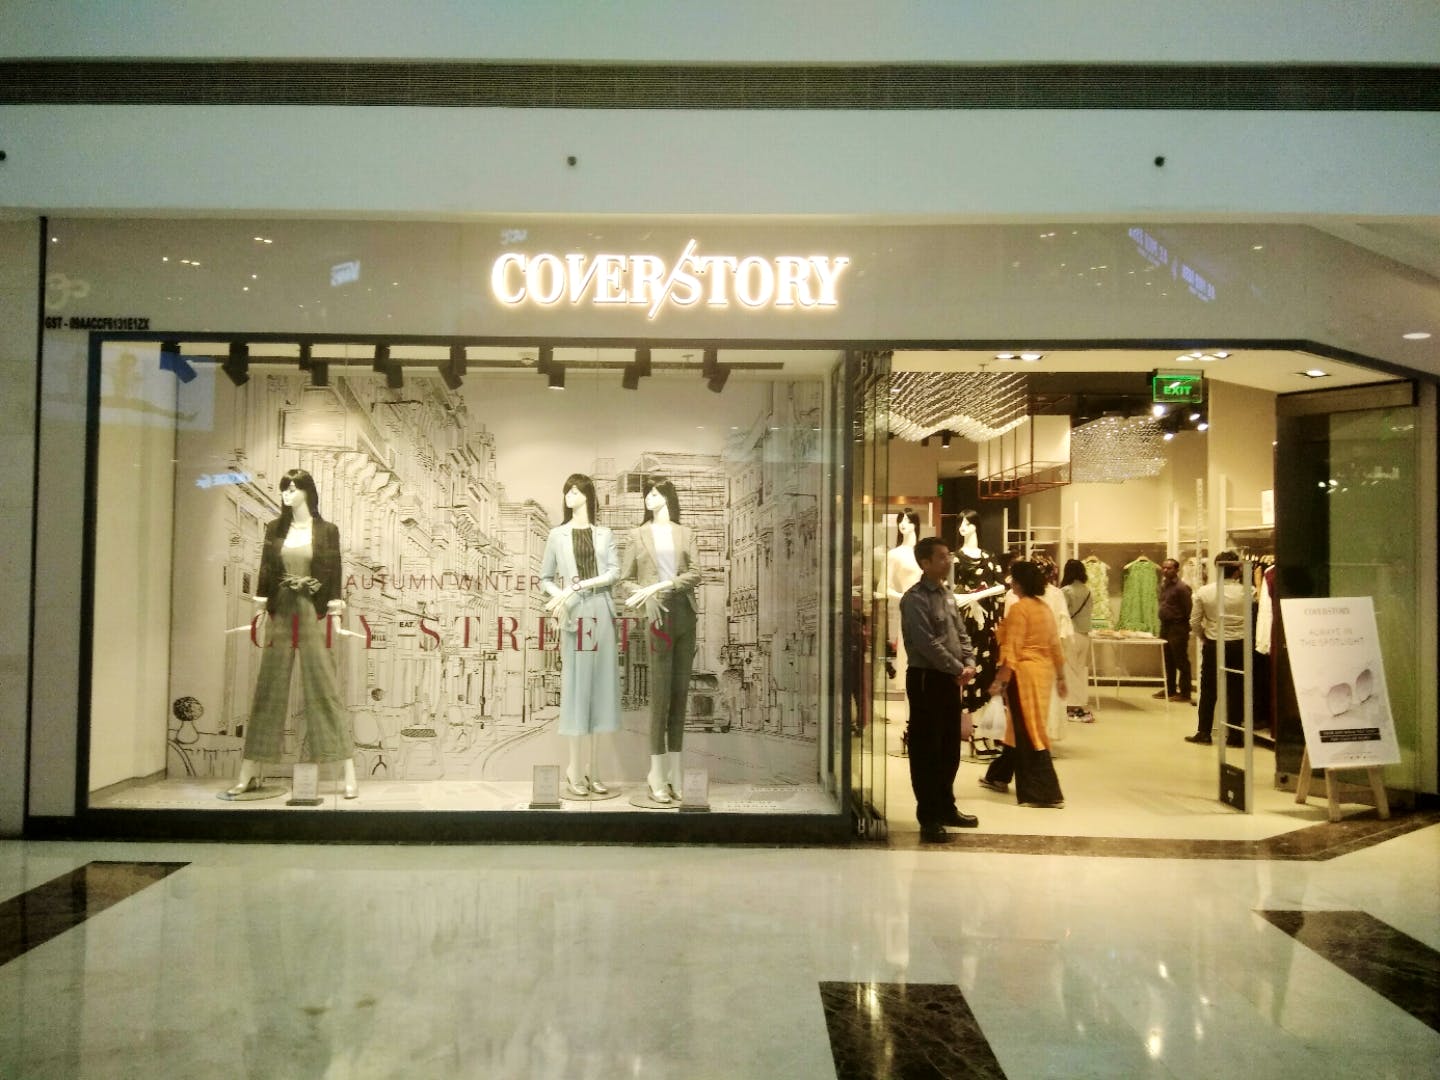 Display window,Boutique,Retail,Building,Outlet store,Shopping mall,Display case,Tourist attraction